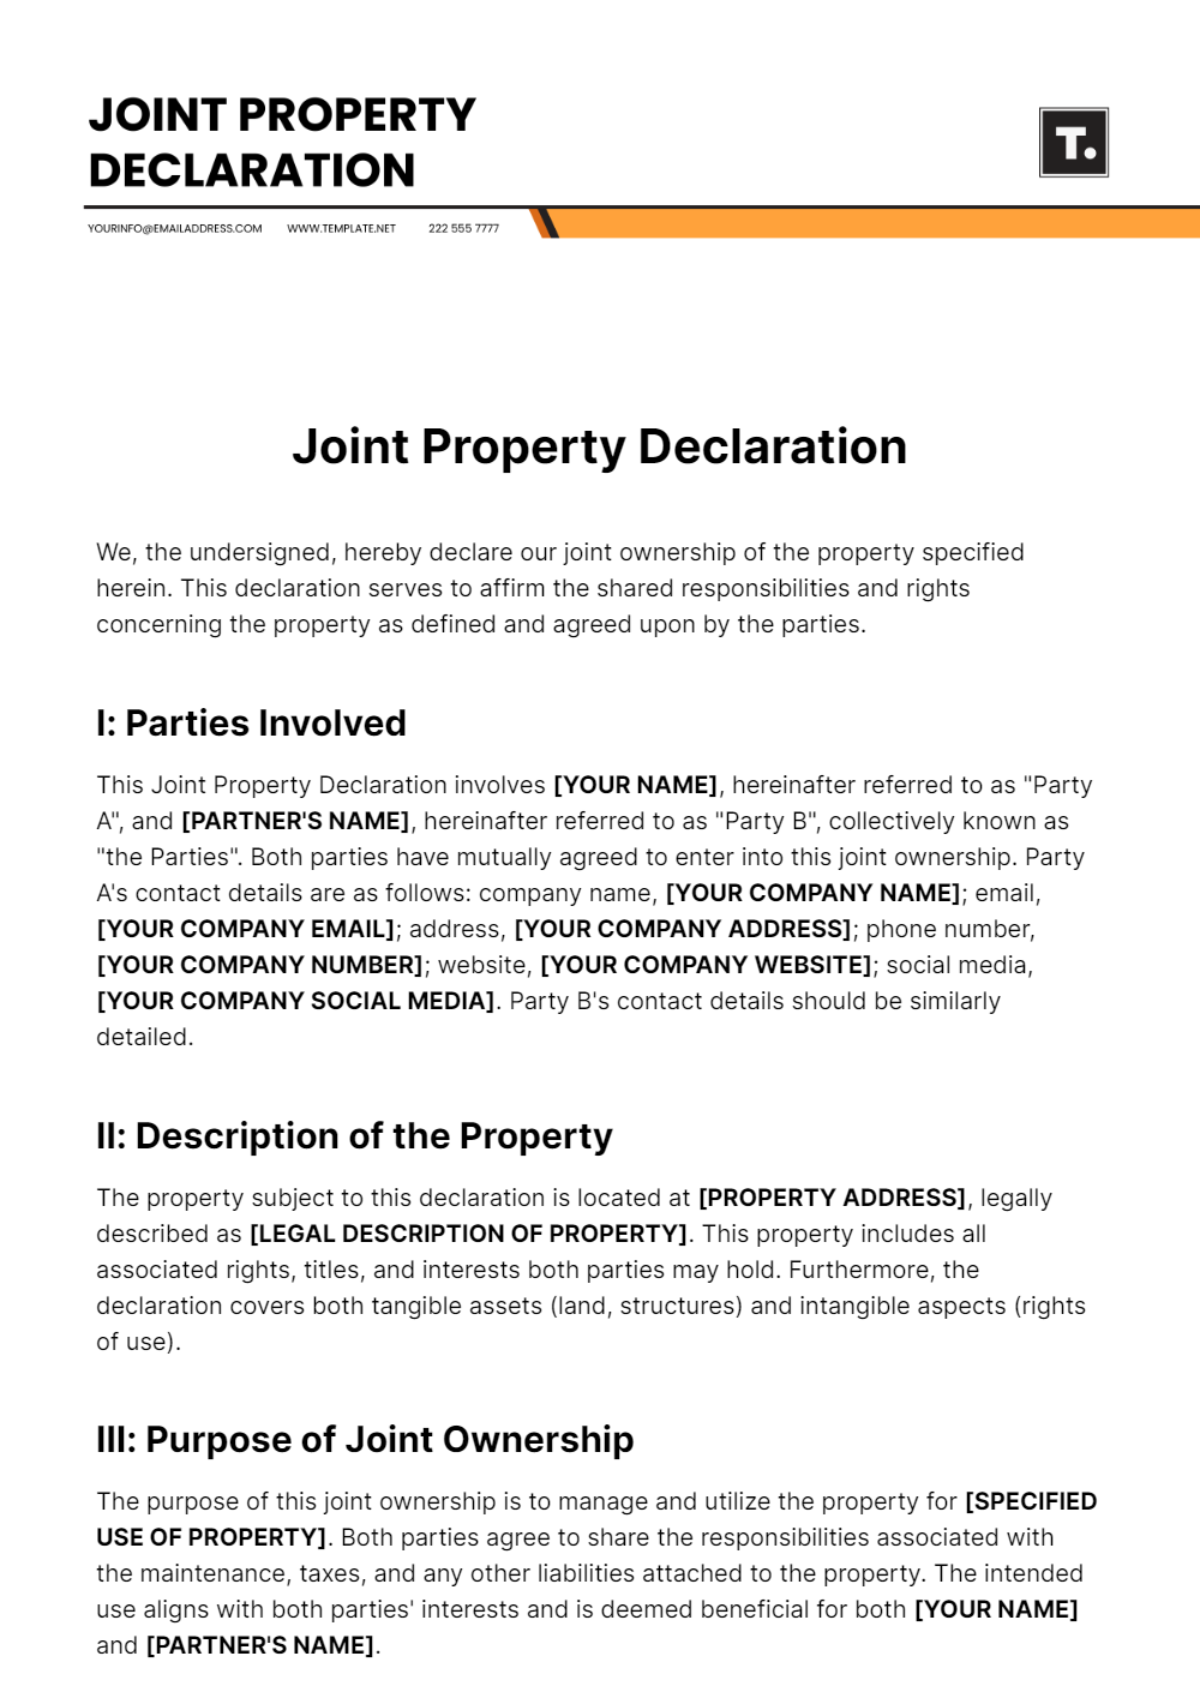 Joint Property Declaration Template